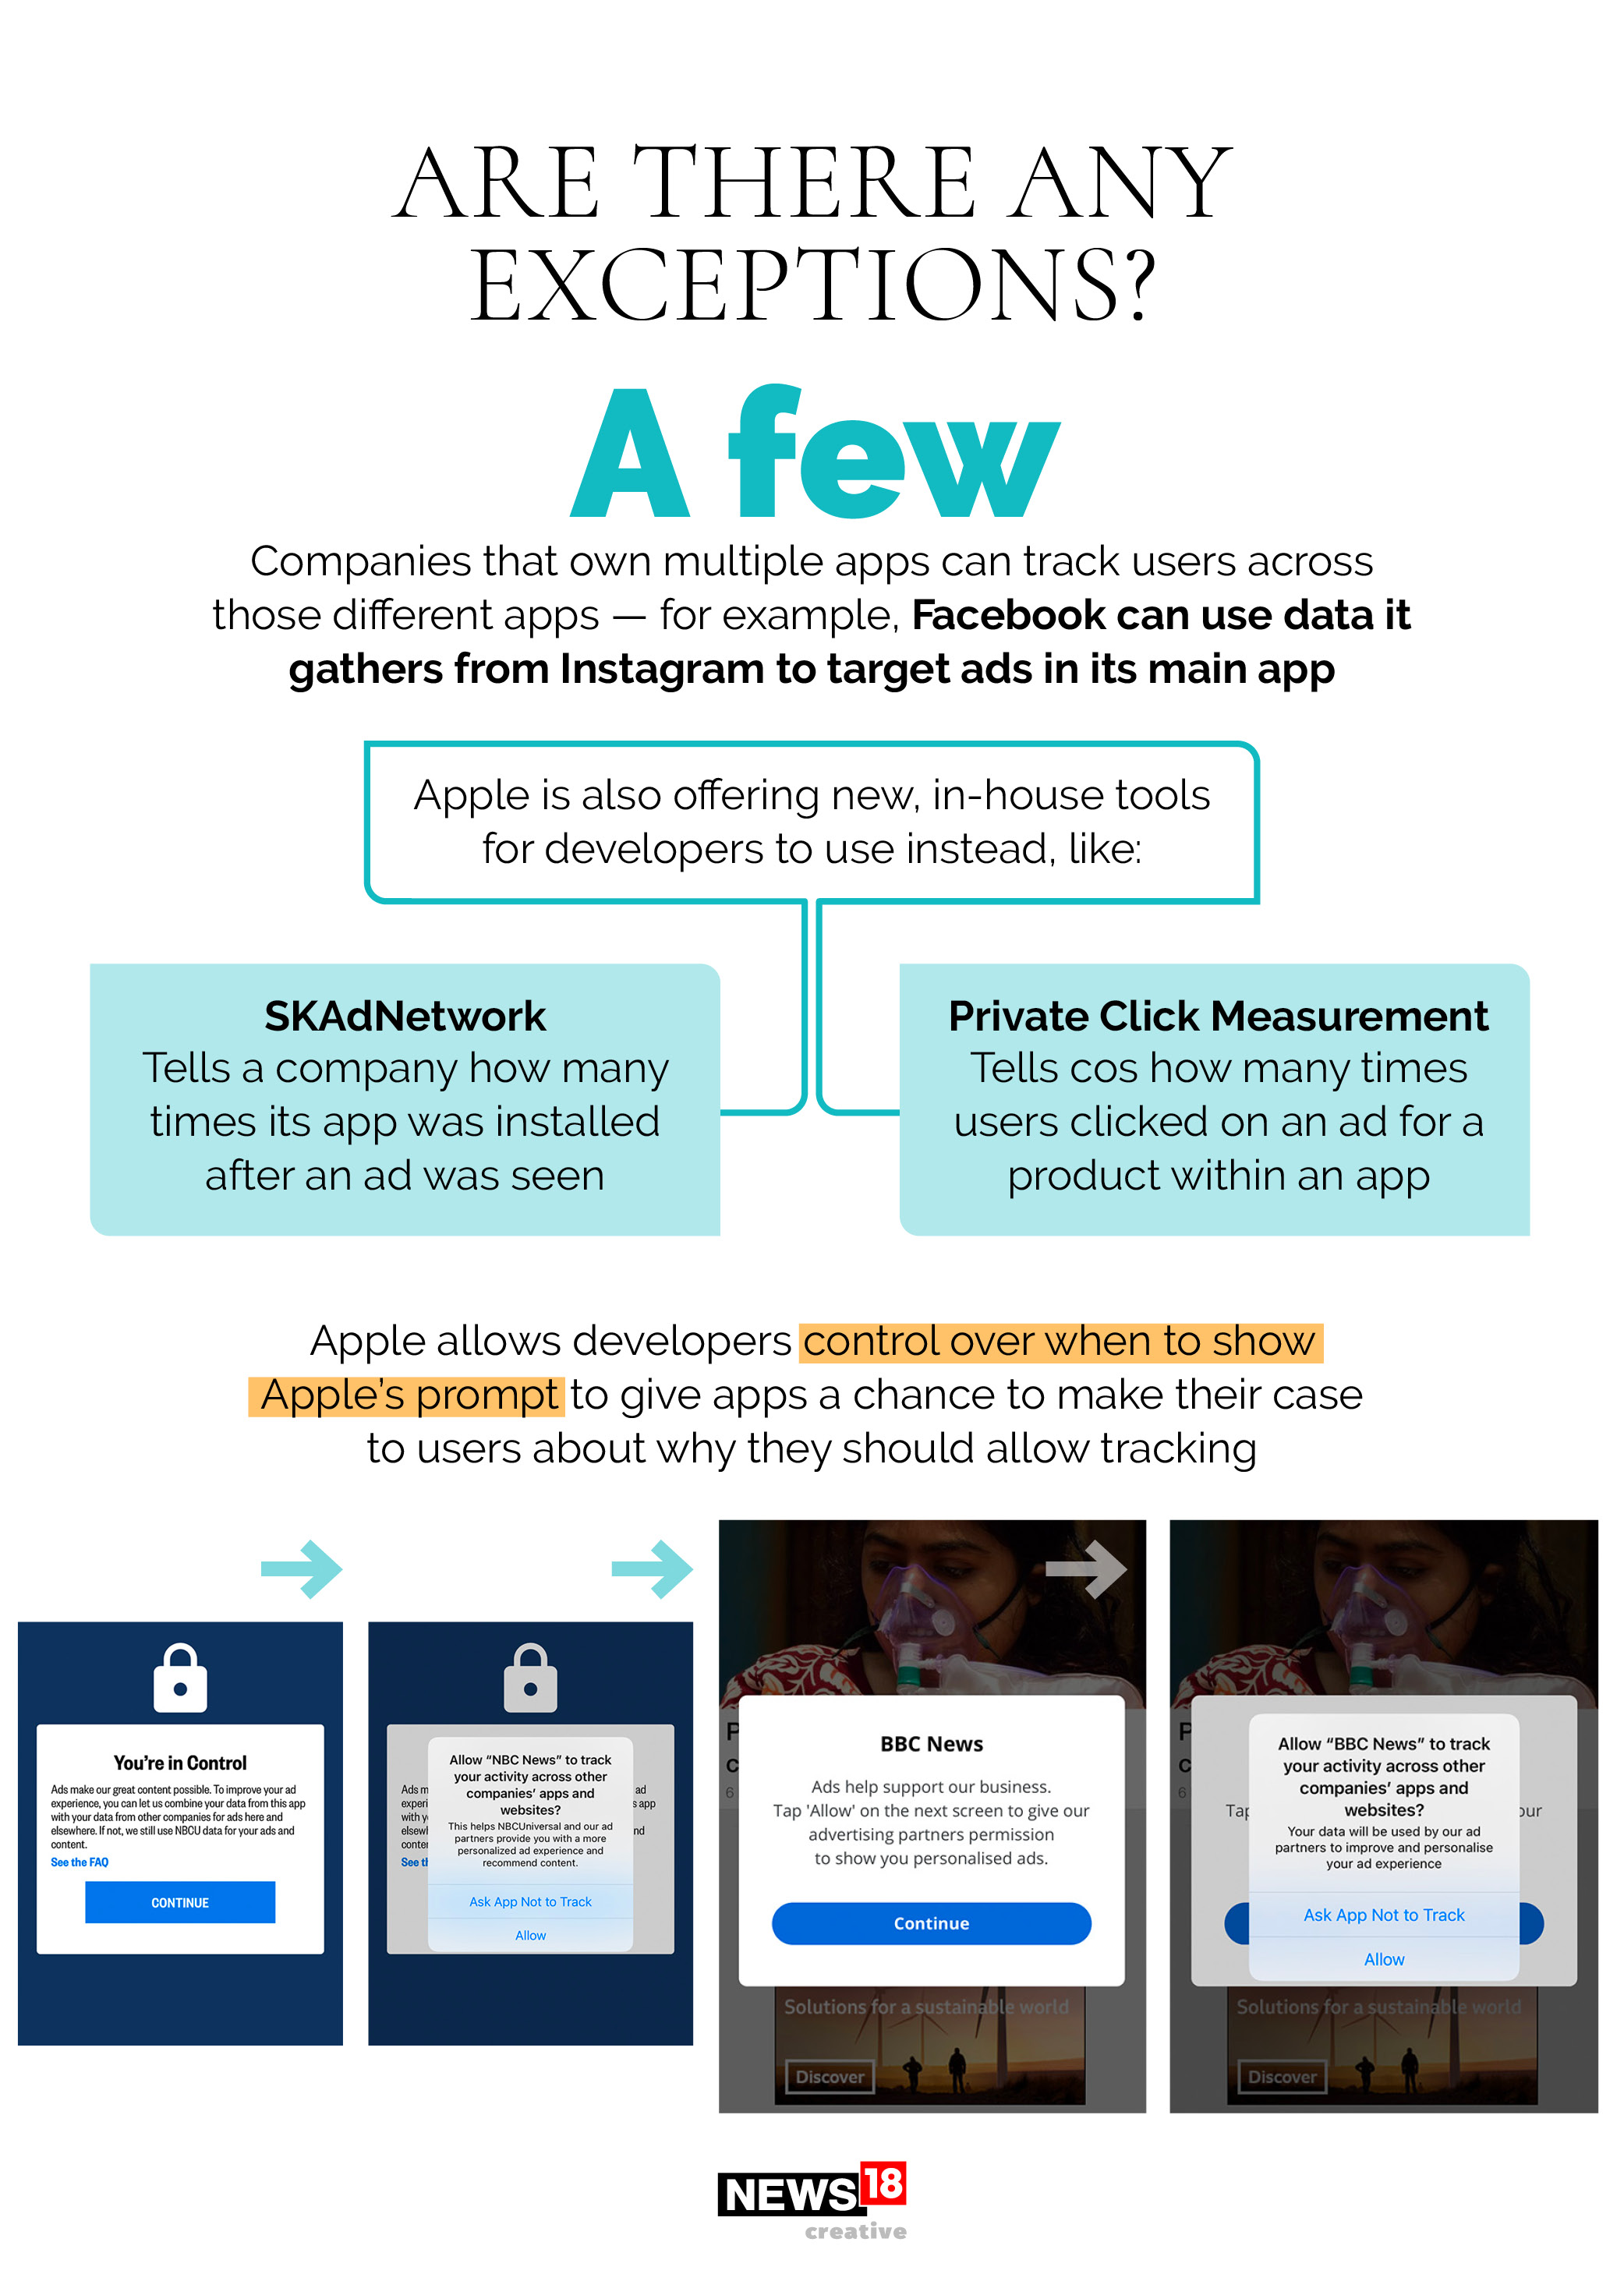 How Apple's new data privacy feature will give more control to users